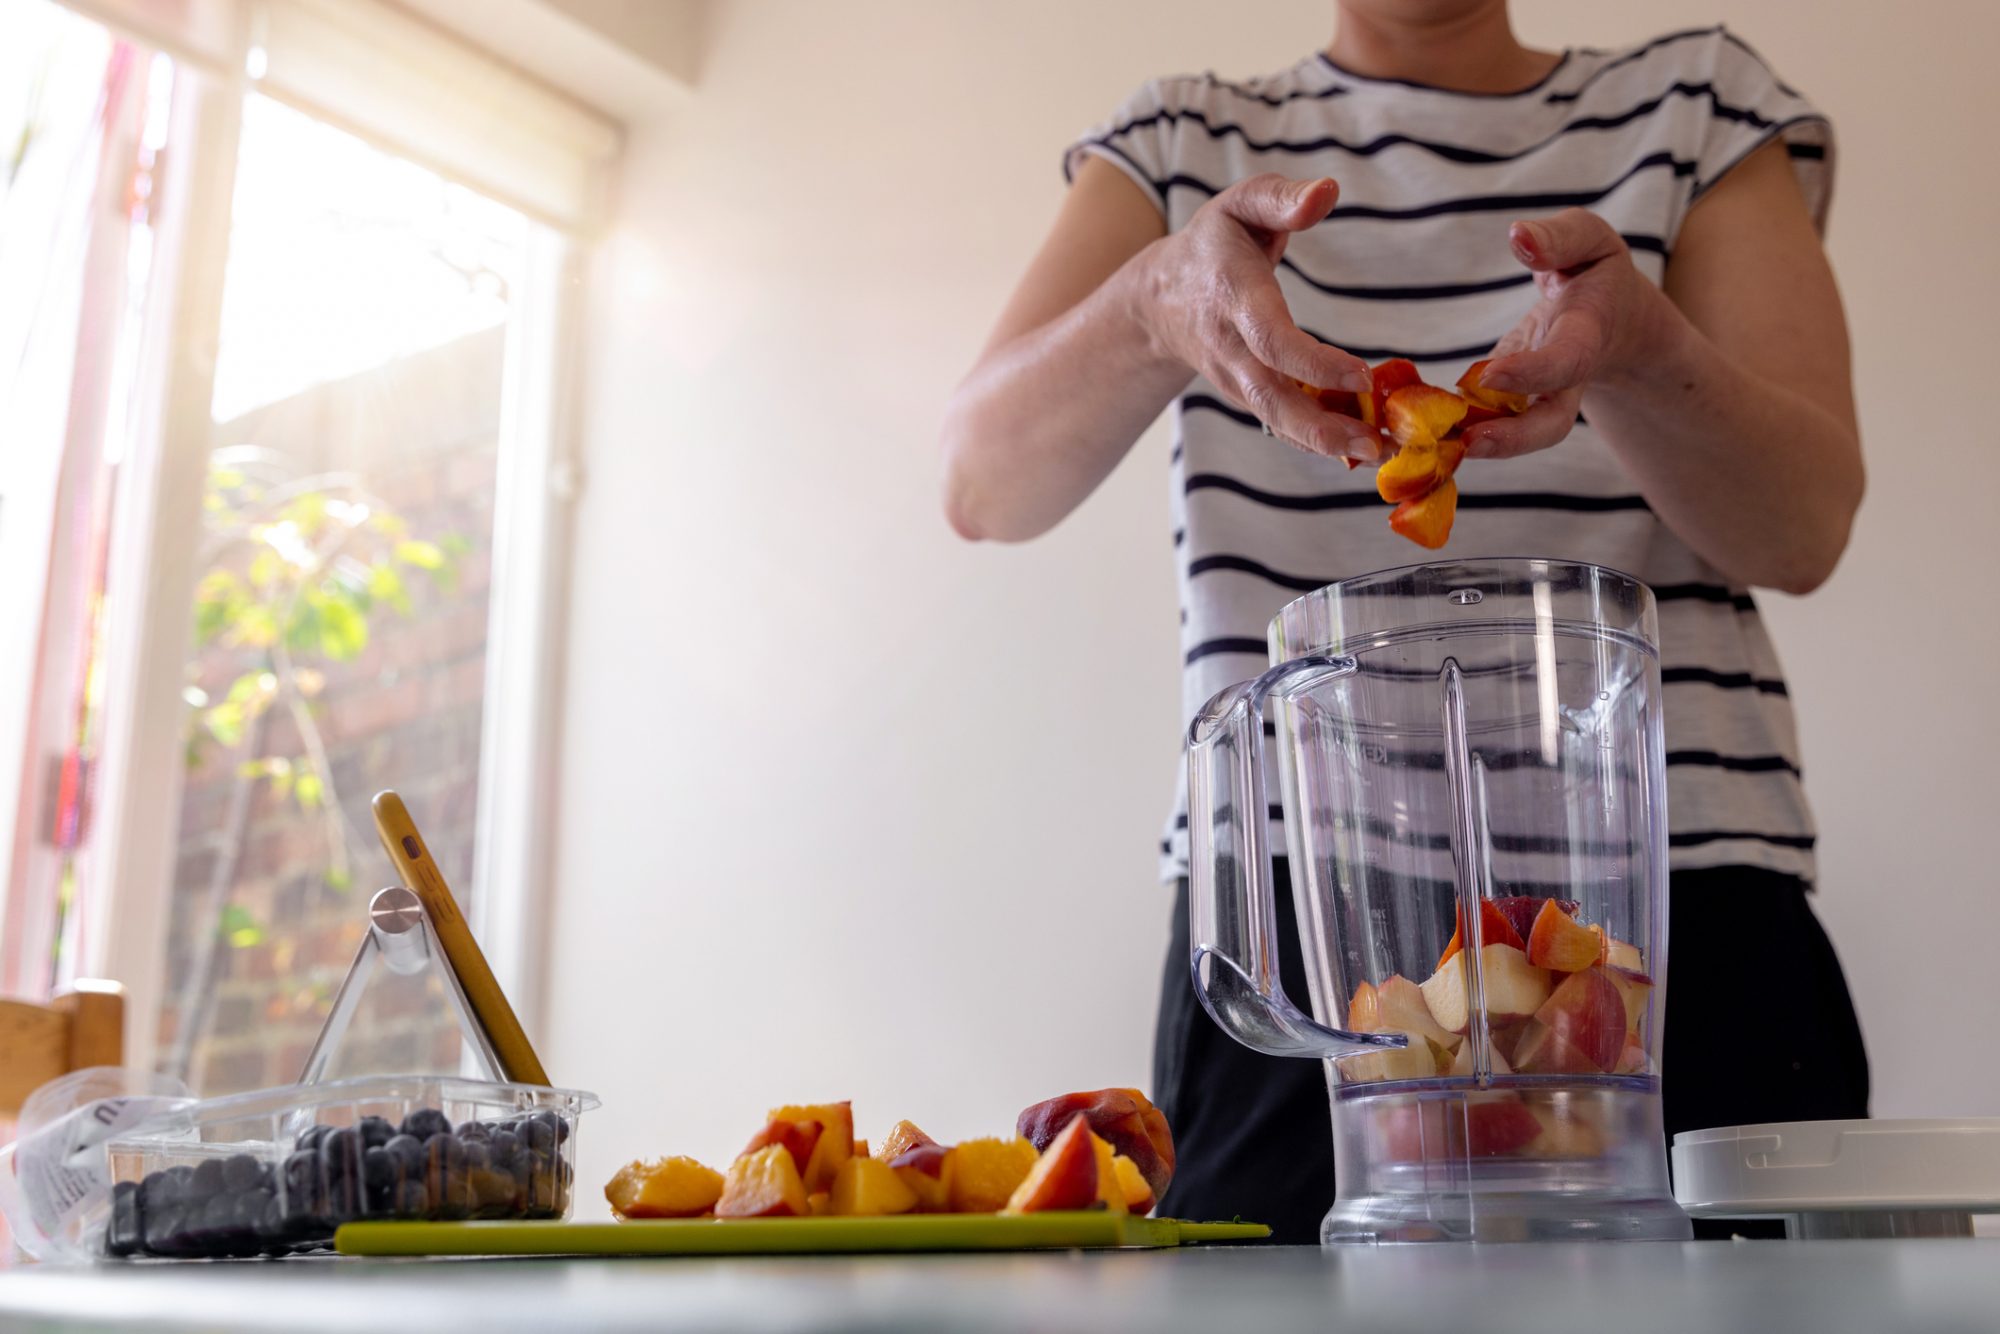 Medium shot, part of a mature female adult putting fruit into a fruit blender in her kitchen with the sun coming in through the window. She has her phone stood up reading a recipe from it.